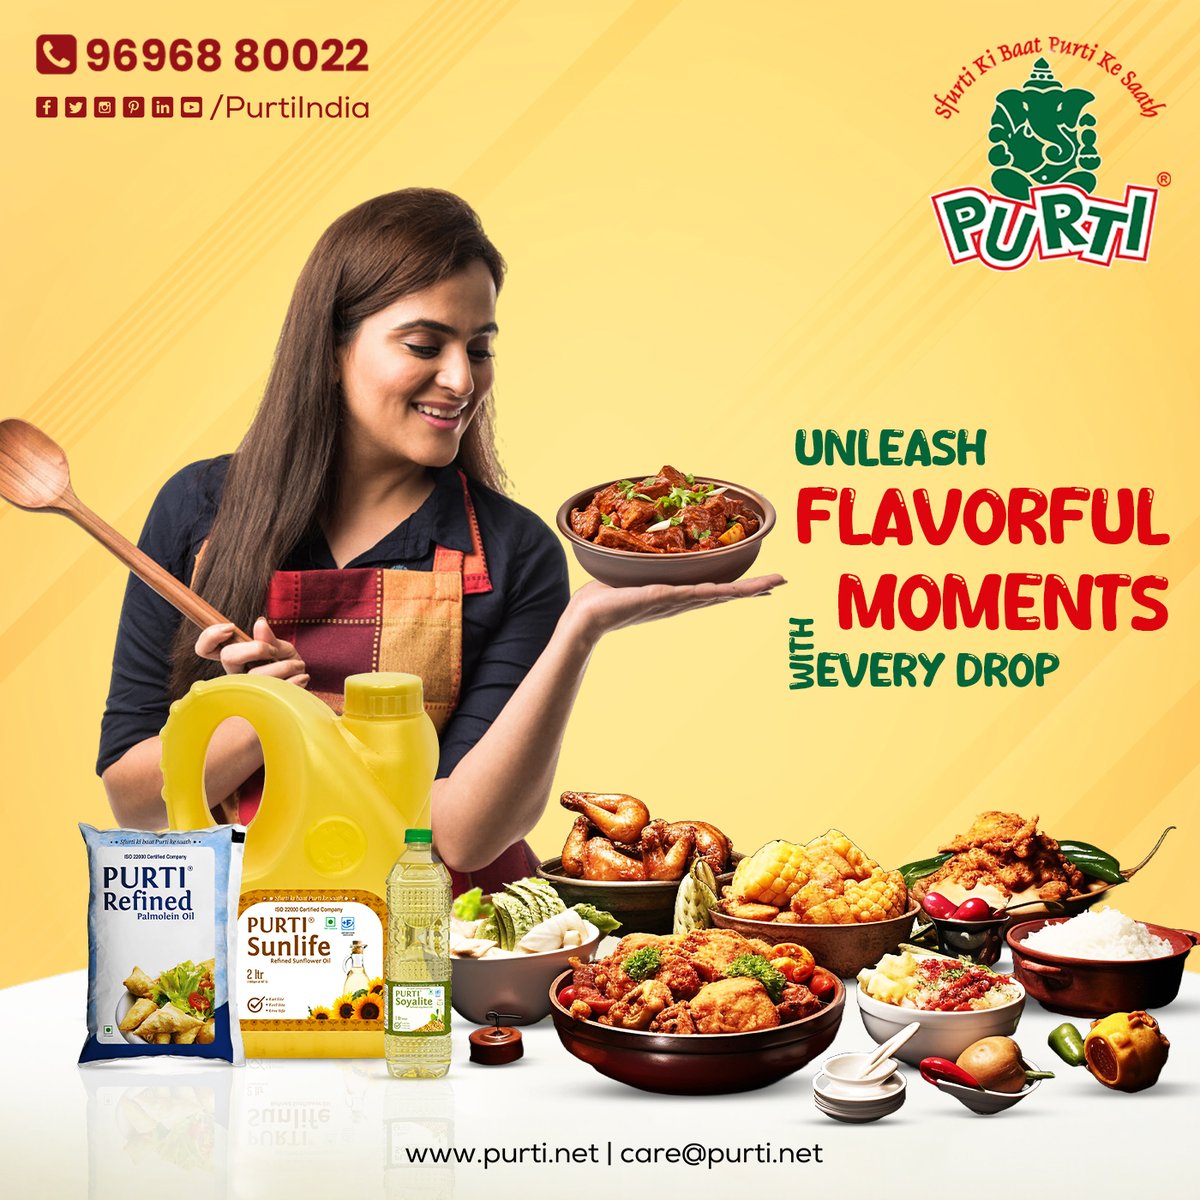 Indulge in delicious moments with every pour of 𝐏𝐮𝐫𝐭𝐢 𝐎𝐢𝐥𝐬!! For Distributorship: bit.ly/3dNb4AC #Purti #EdibleOil #CookingOil #CookingOilChoices #TasteAdventure #PurtiRefined #PurtiSoyalite #PalmoleinOil #RiceBranOil #SfurtiKiBaatPurtiKeSaath